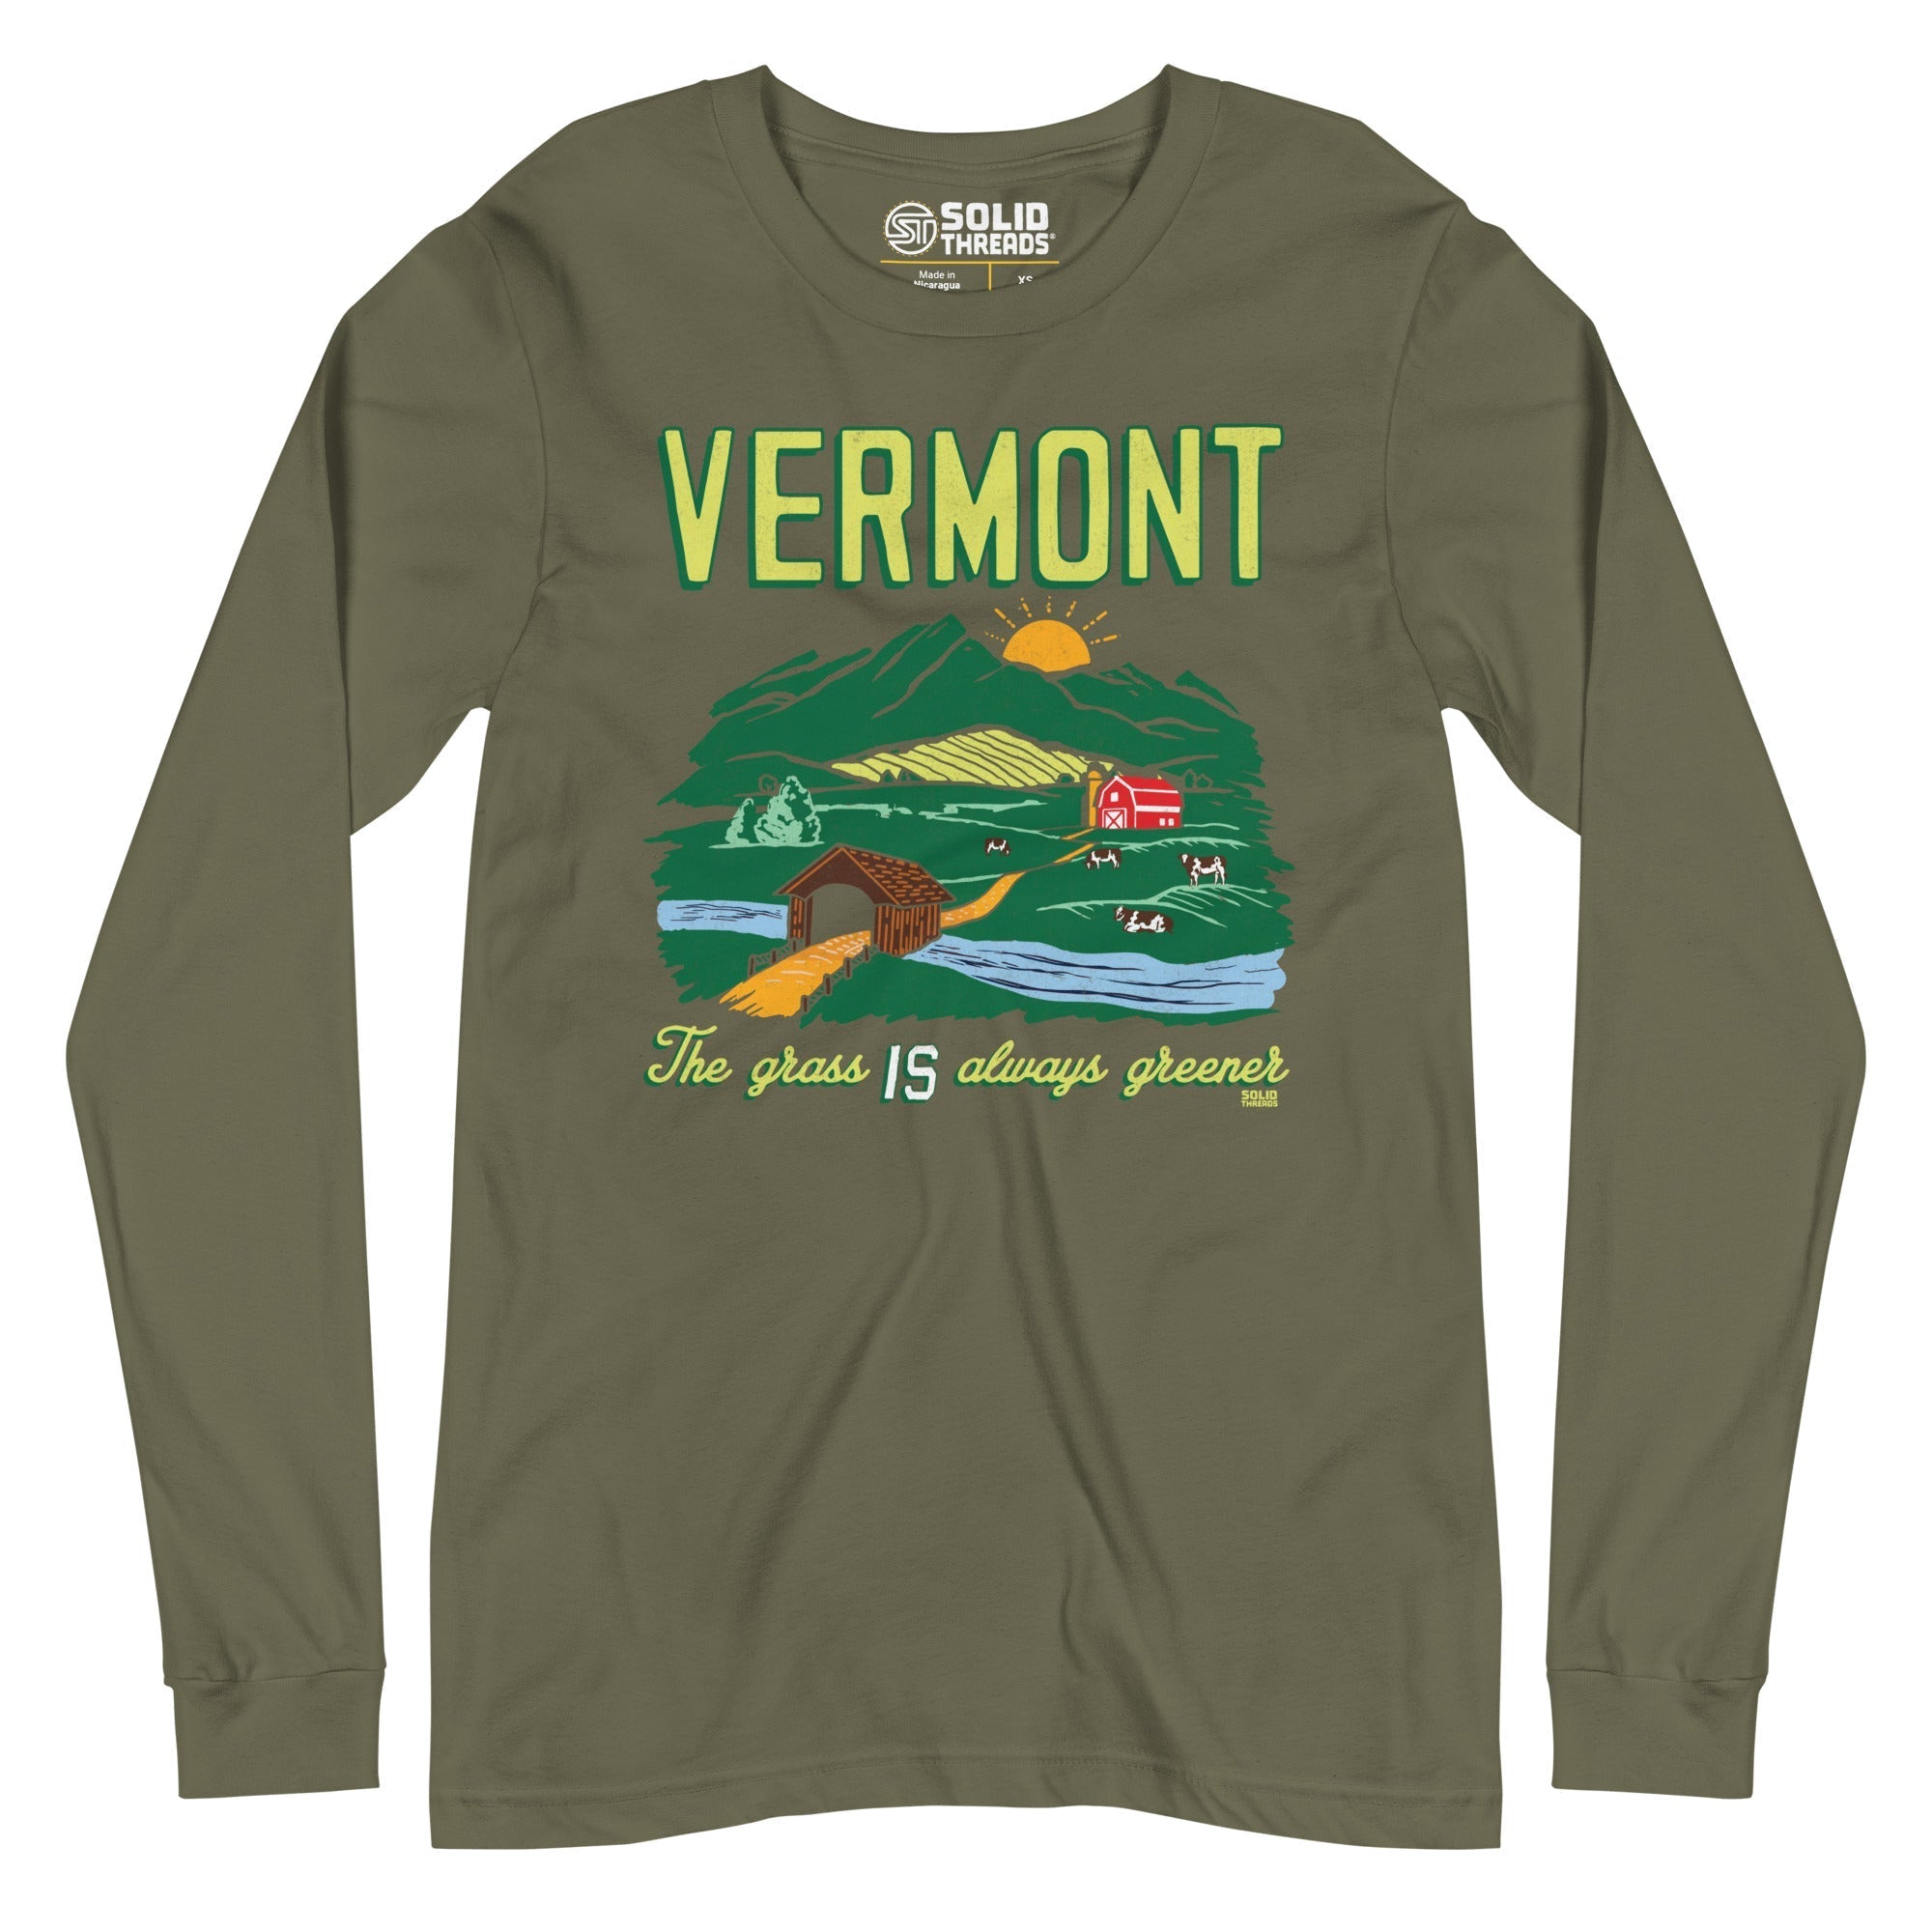 Unisex Vermont The Grass Is Always Greener Cool Long Sleeve T Shirt | Vintage Green Mountains Graphic Tee | Solid Threads